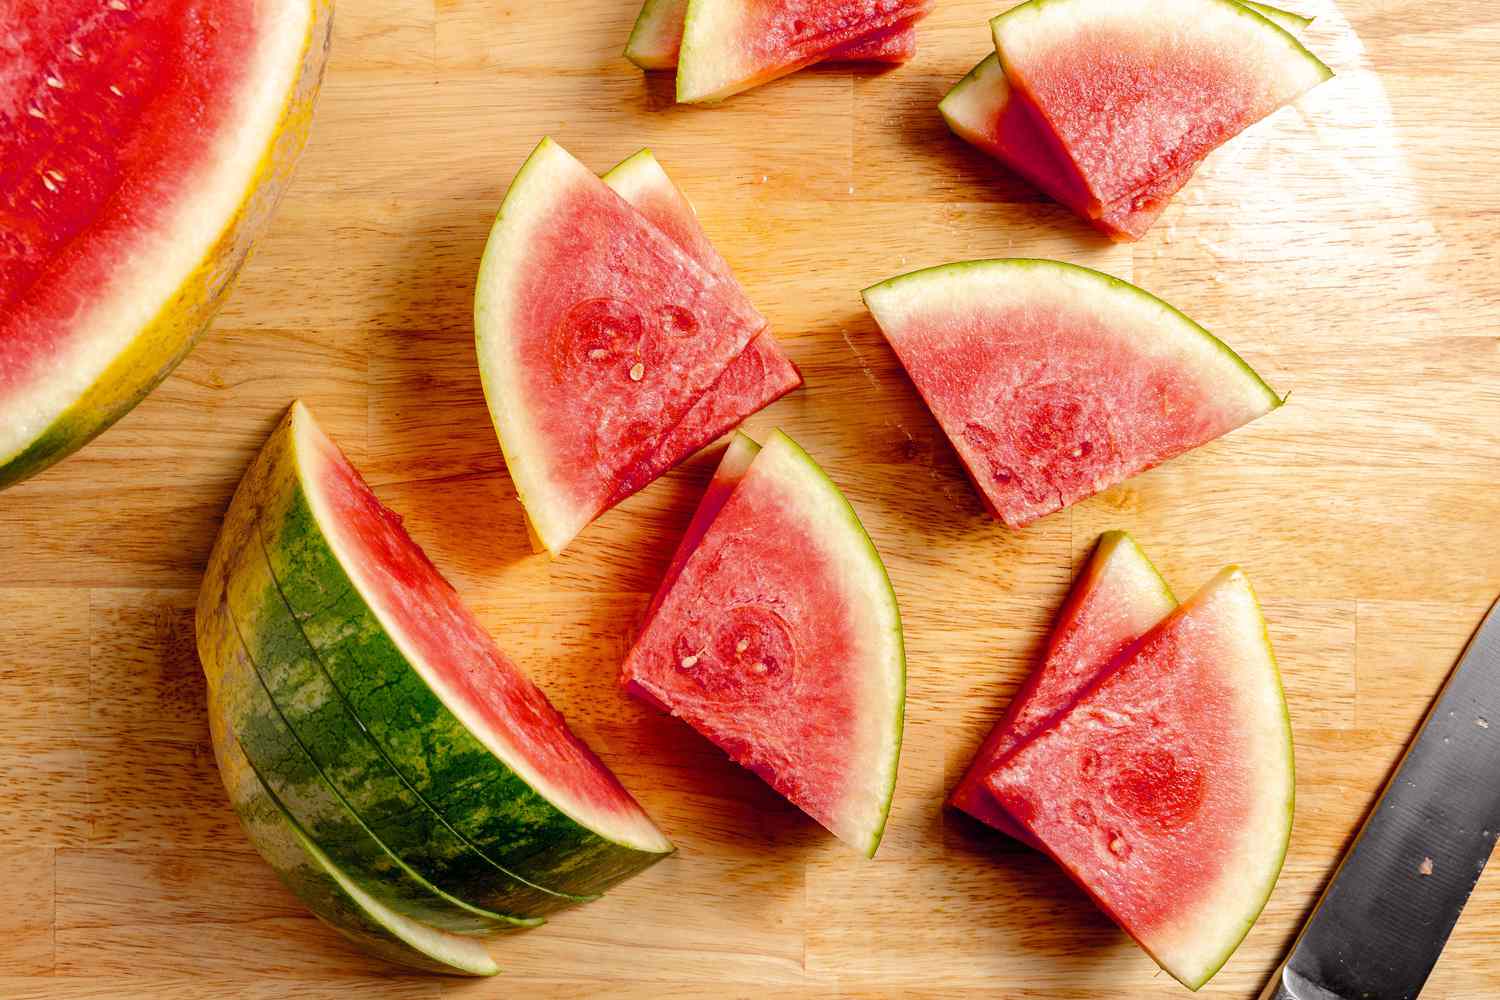 Amazing Watermelon Cutting Hack: Transforming It Into Perfect Triangles!